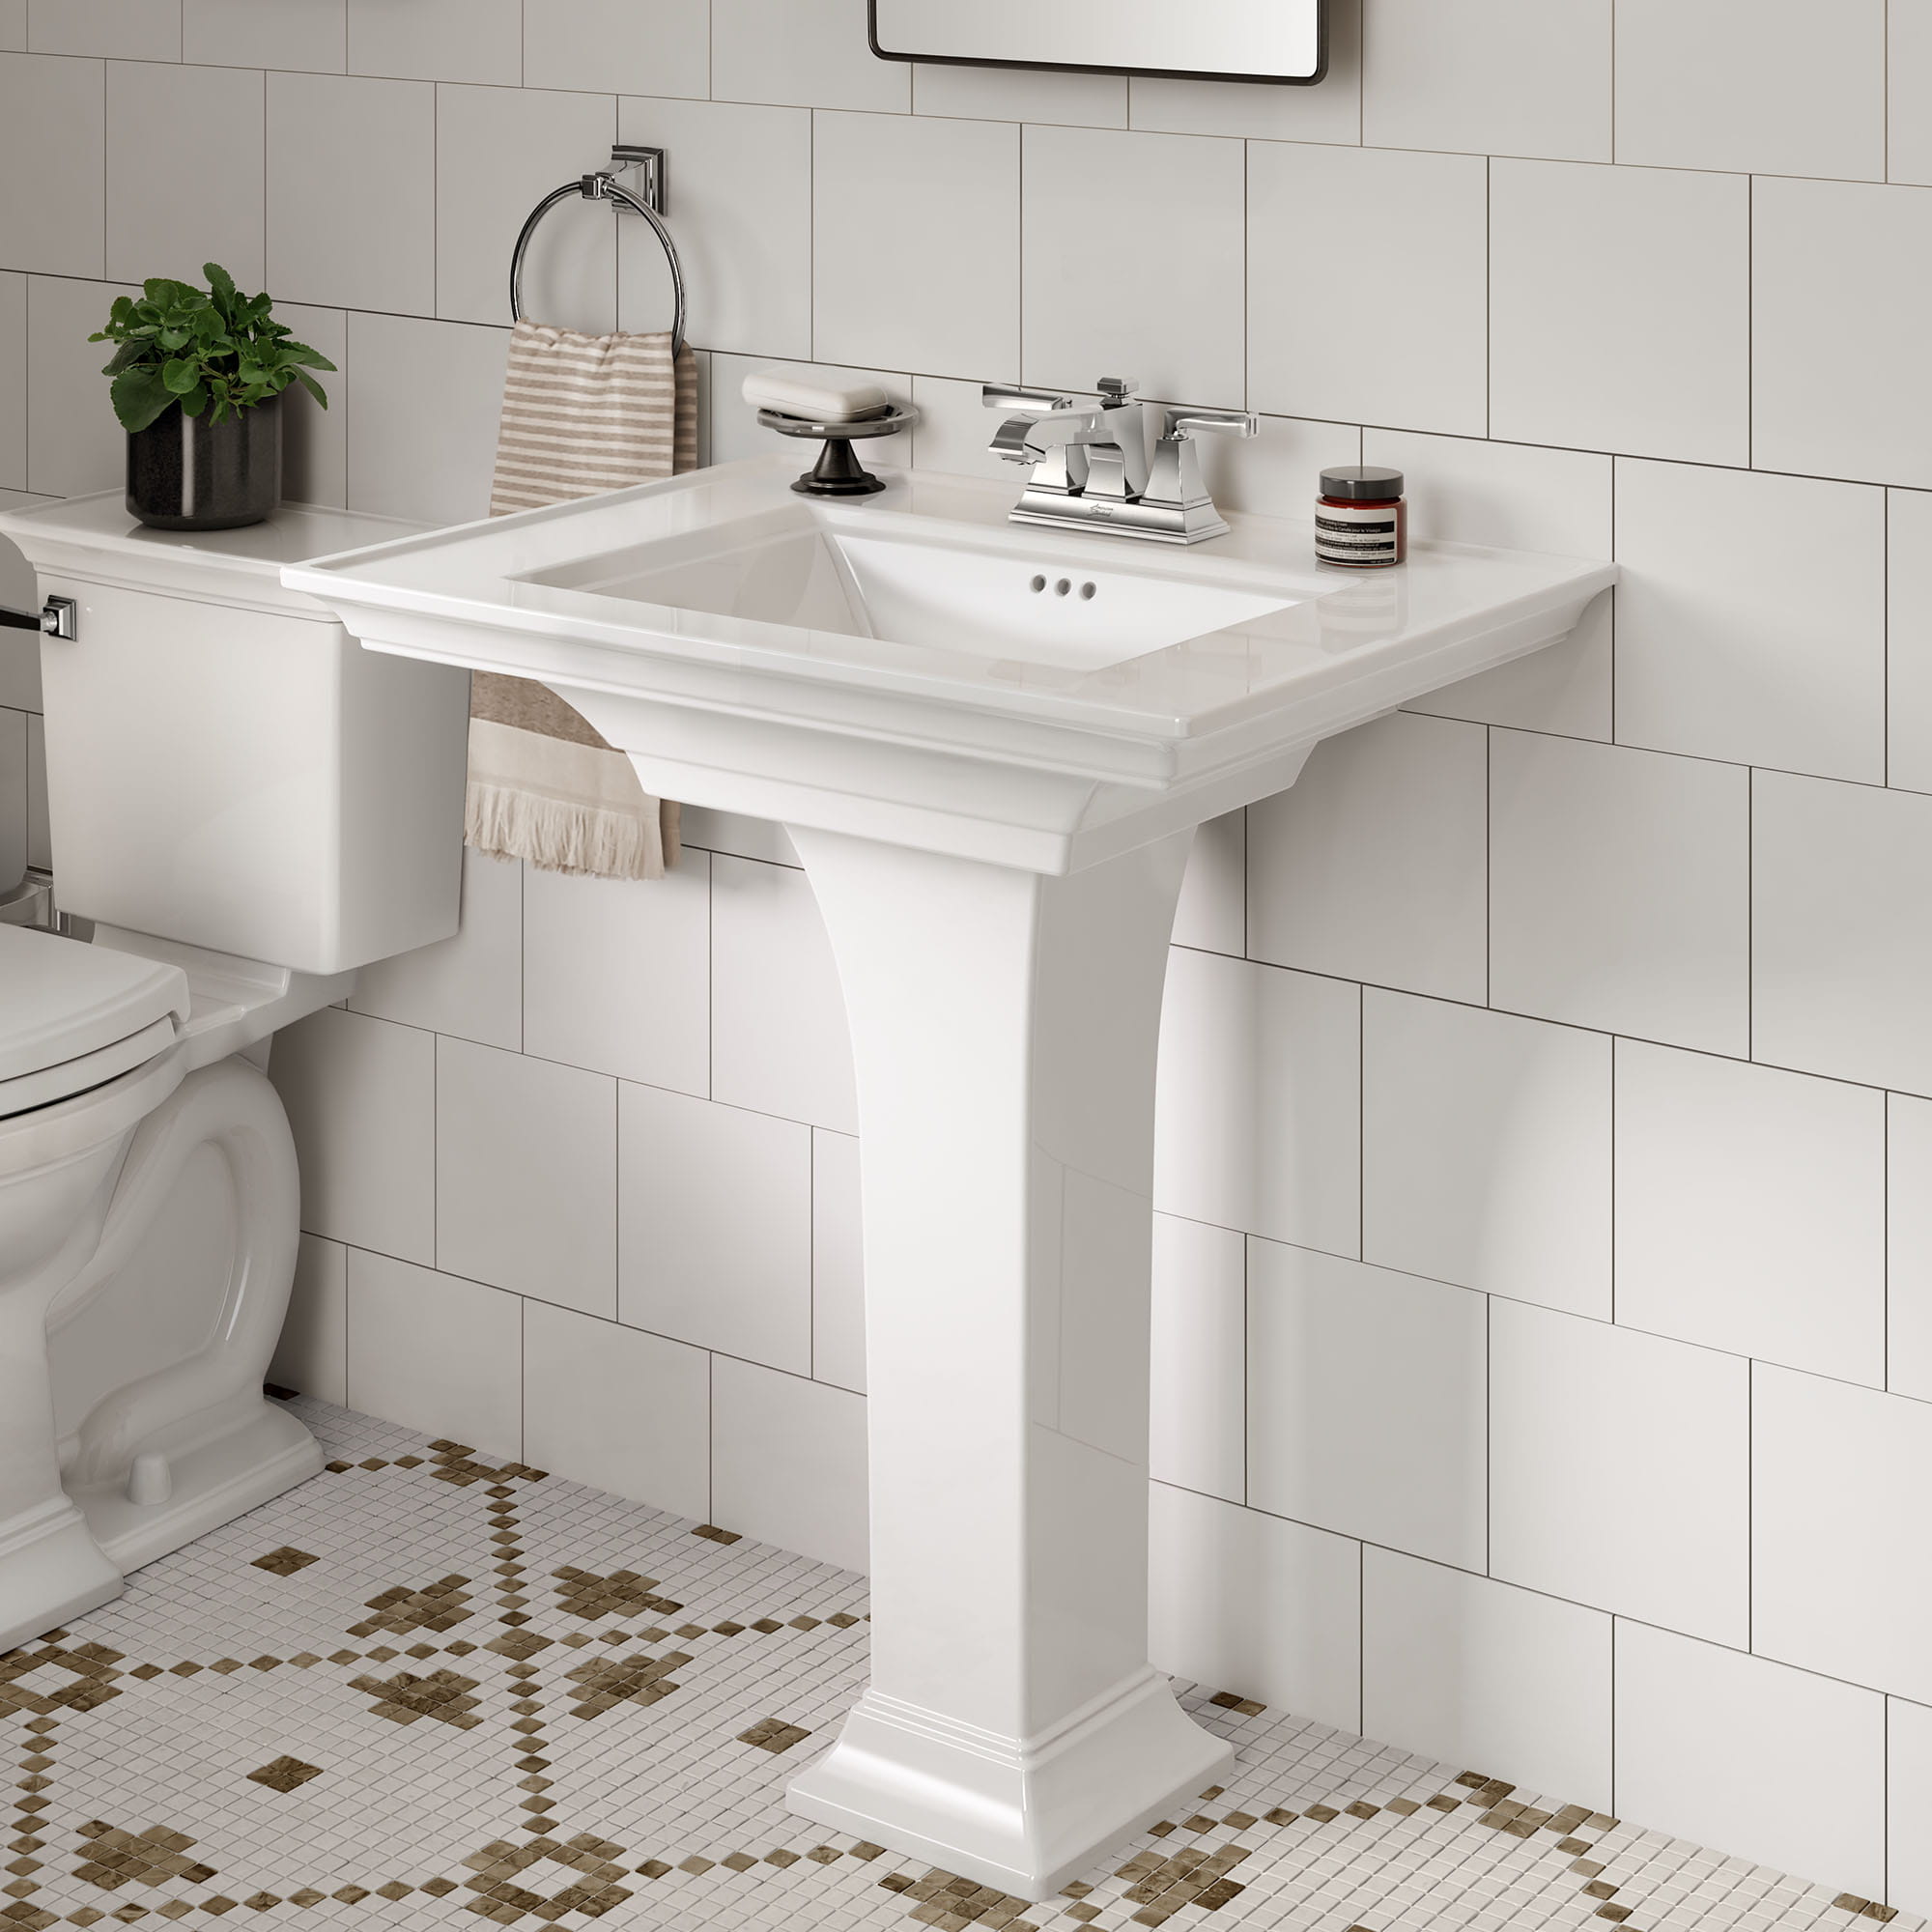 Town Square® S 4-Inch Centerset Pedestal Sink Top and Leg Combination